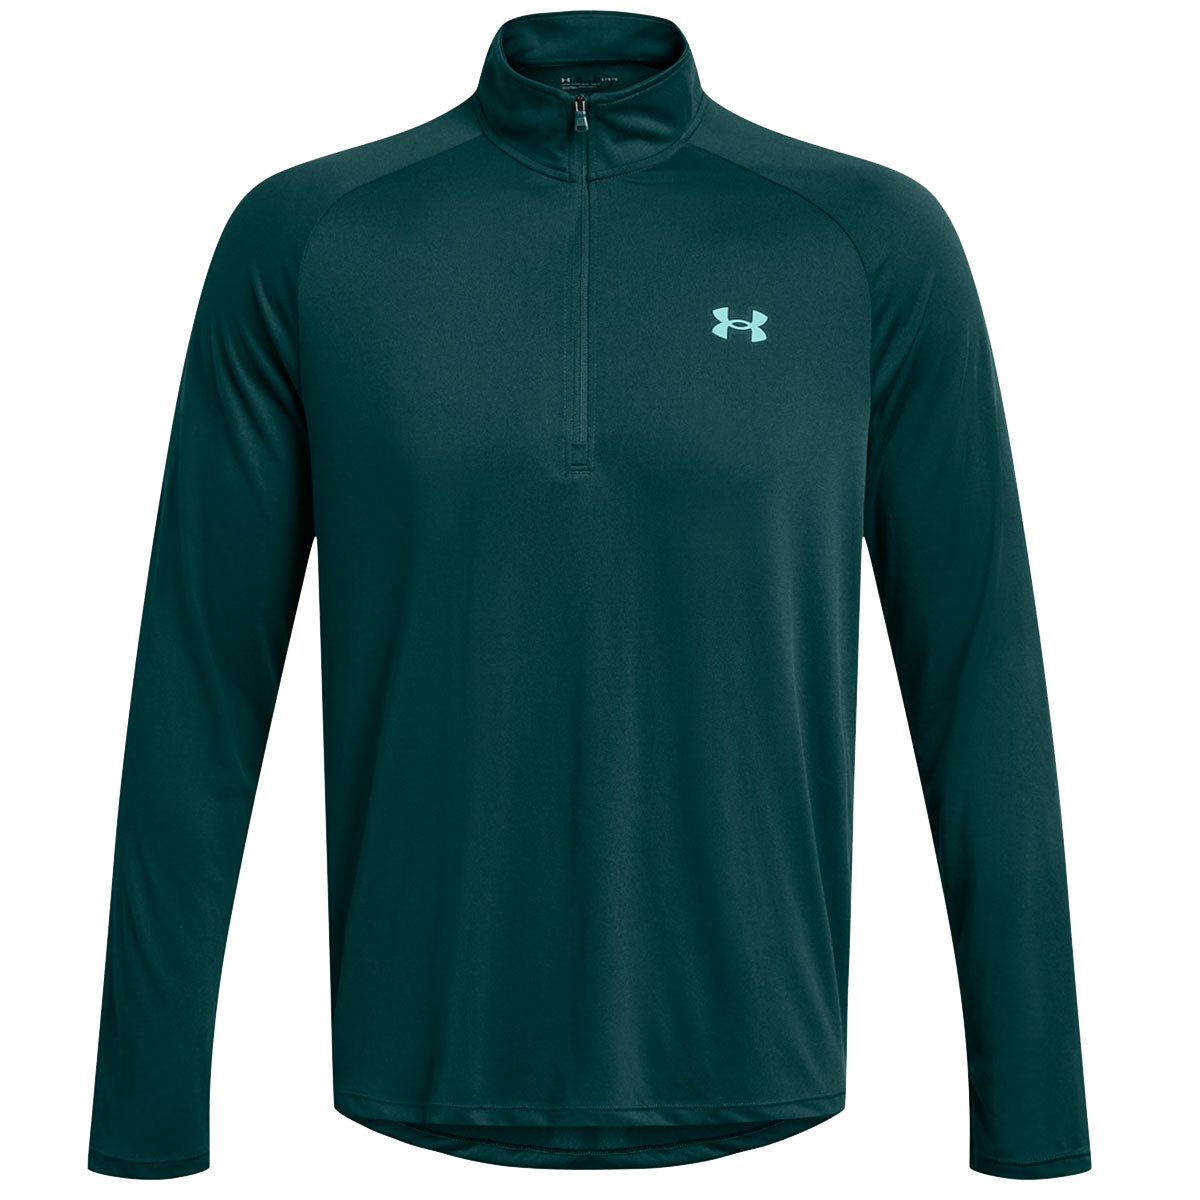 Under Armour Tech 1/2 Zip Training Top - Mens - Hydro Teal/Radial Turquoise